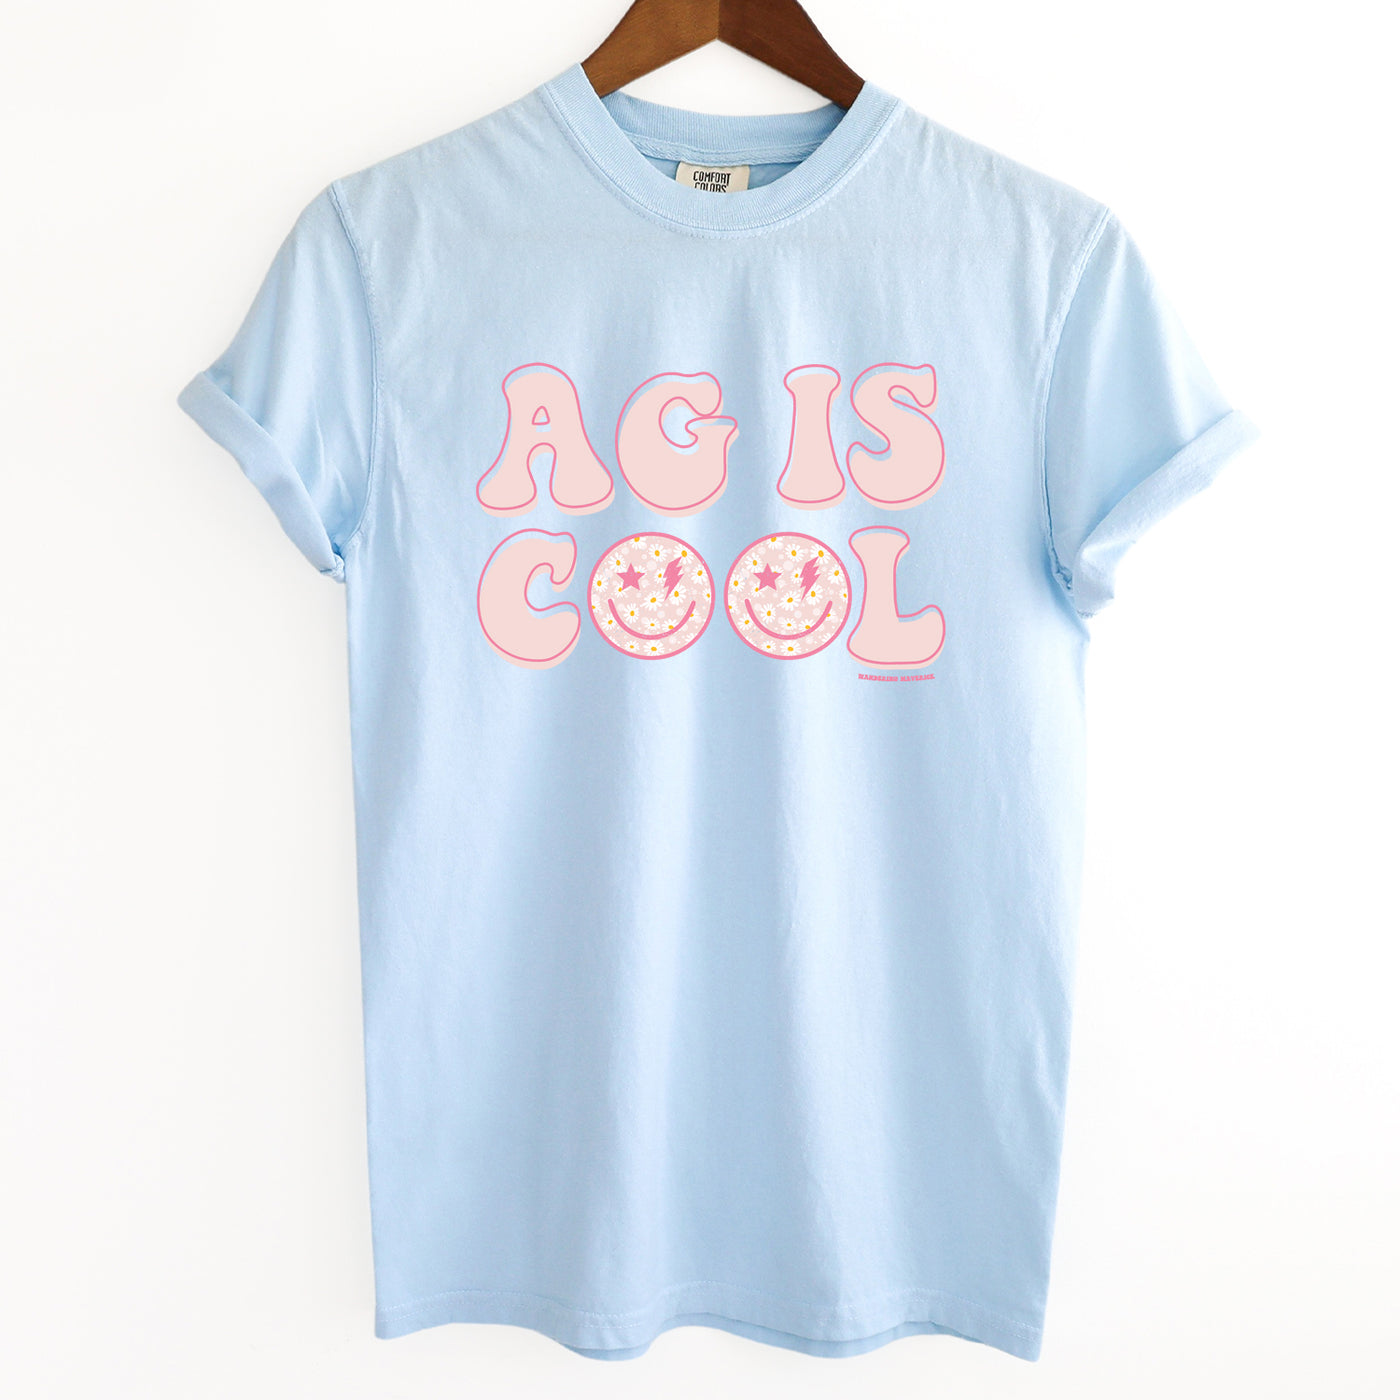 Spring Ag Is COOL ComfortWash/ComfortColor T-Shirt (S-4XL) - Multiple Colors!